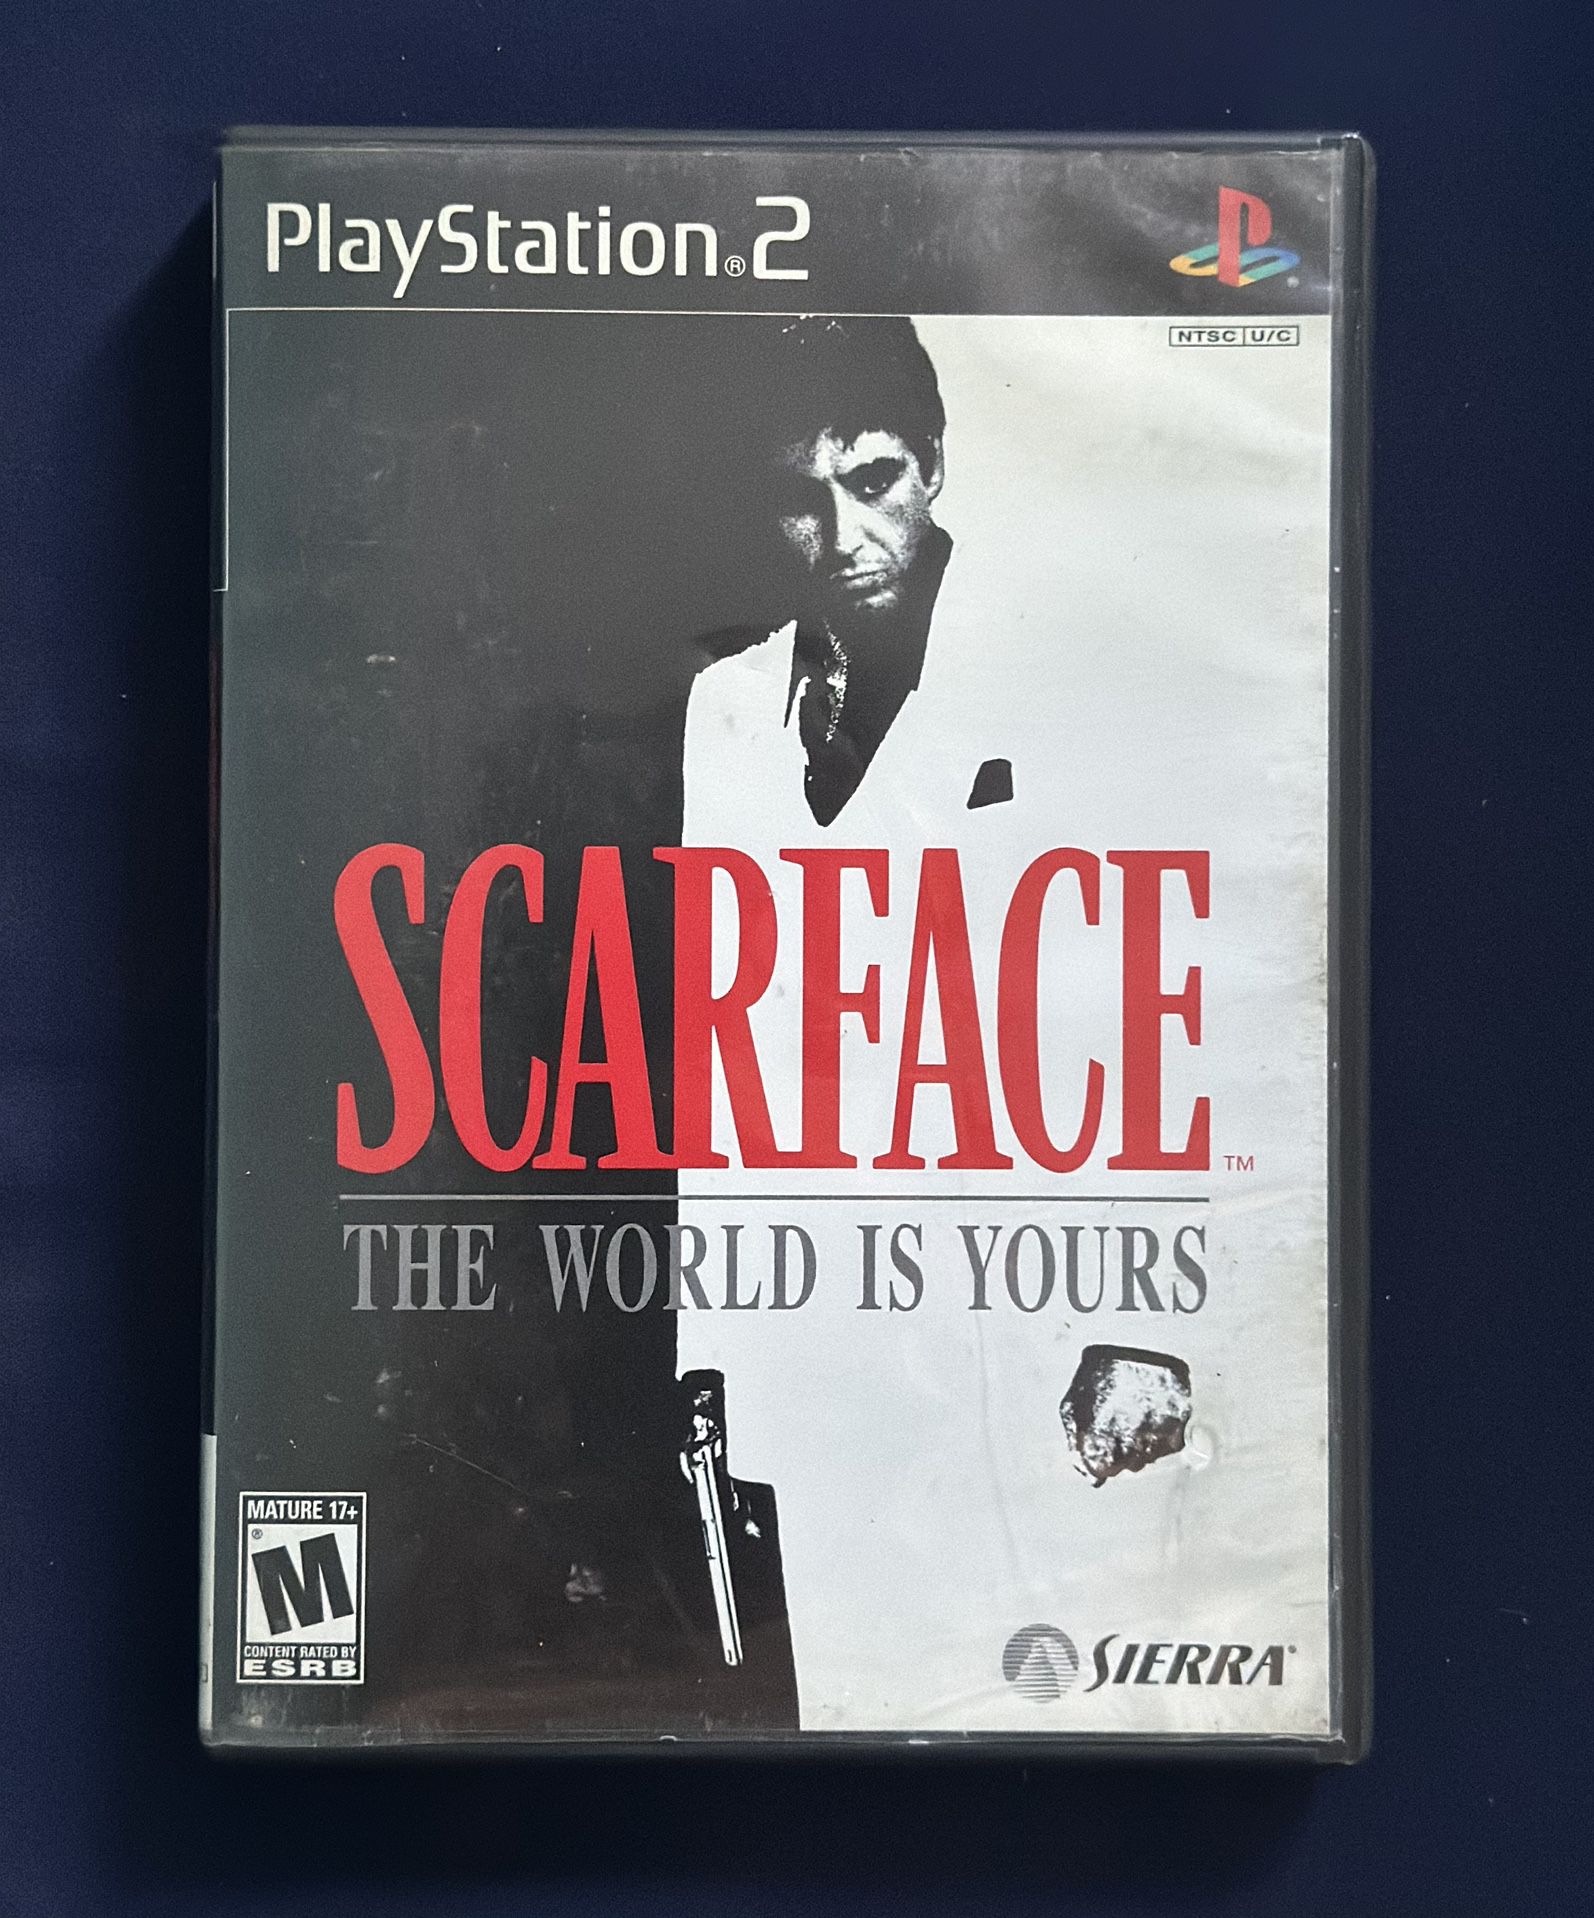 Scarface The World Is Yours (PS2)